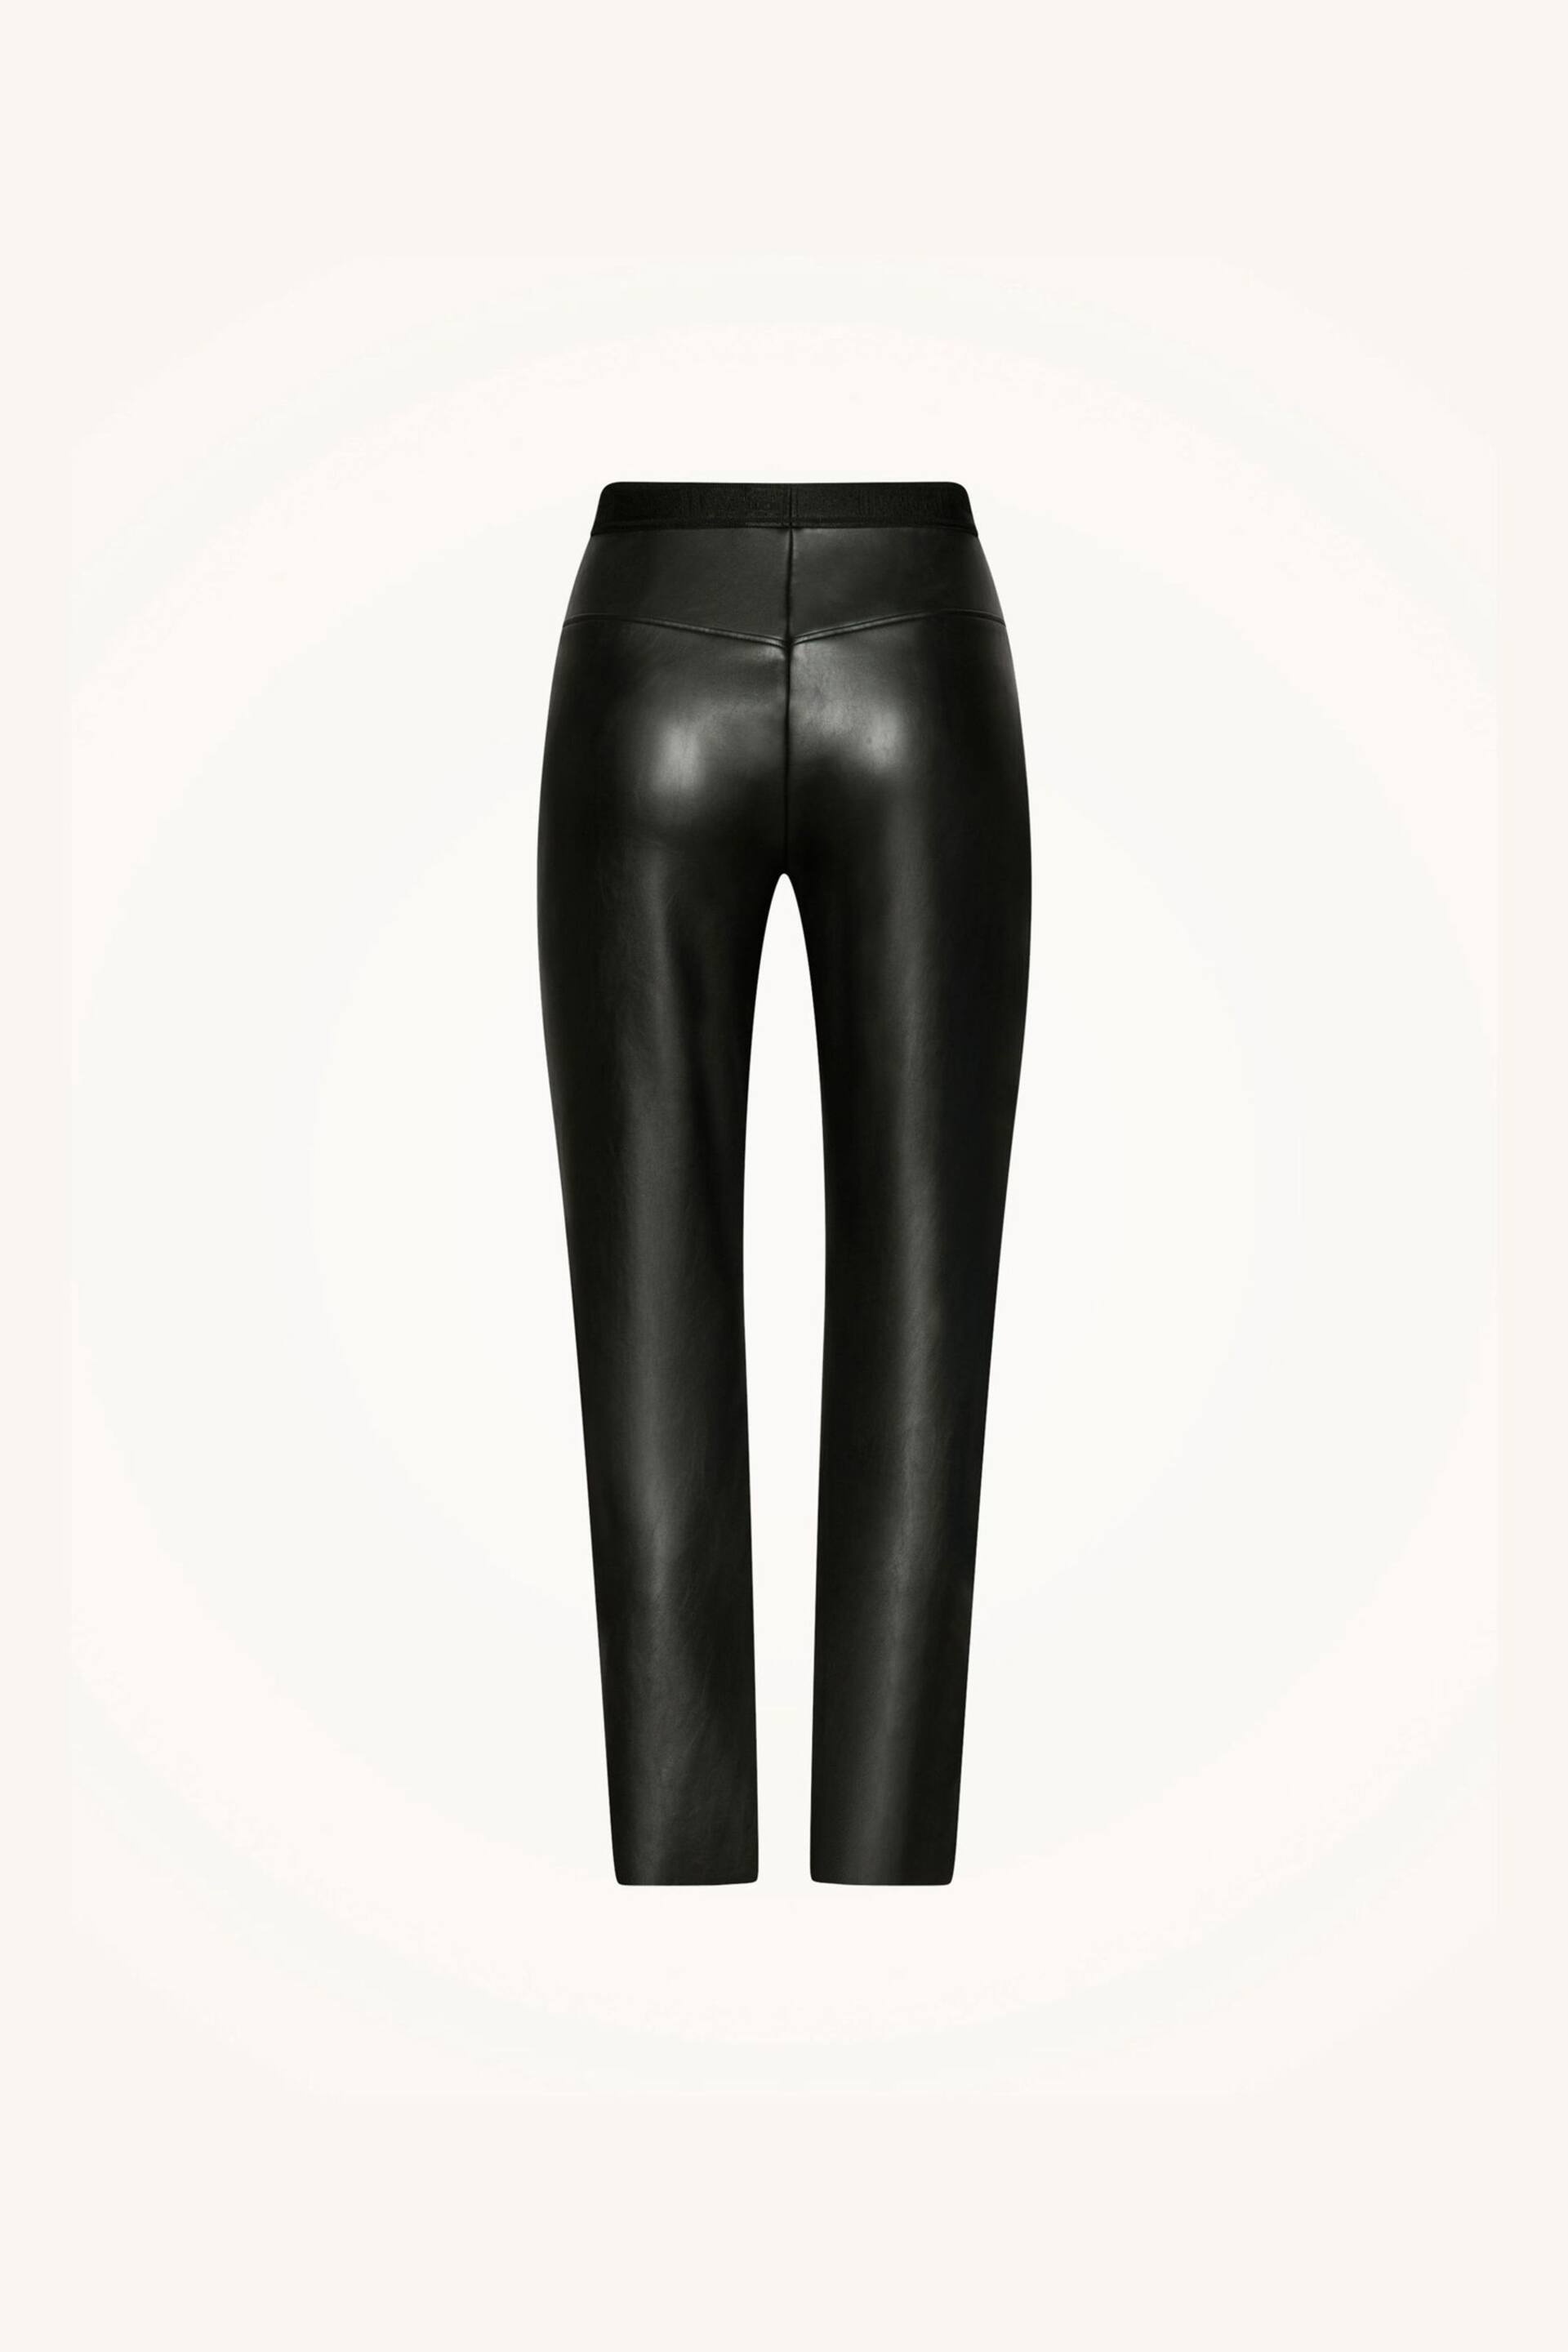 Wolford Black Jenna Flare Trousers - Image 5 of 5